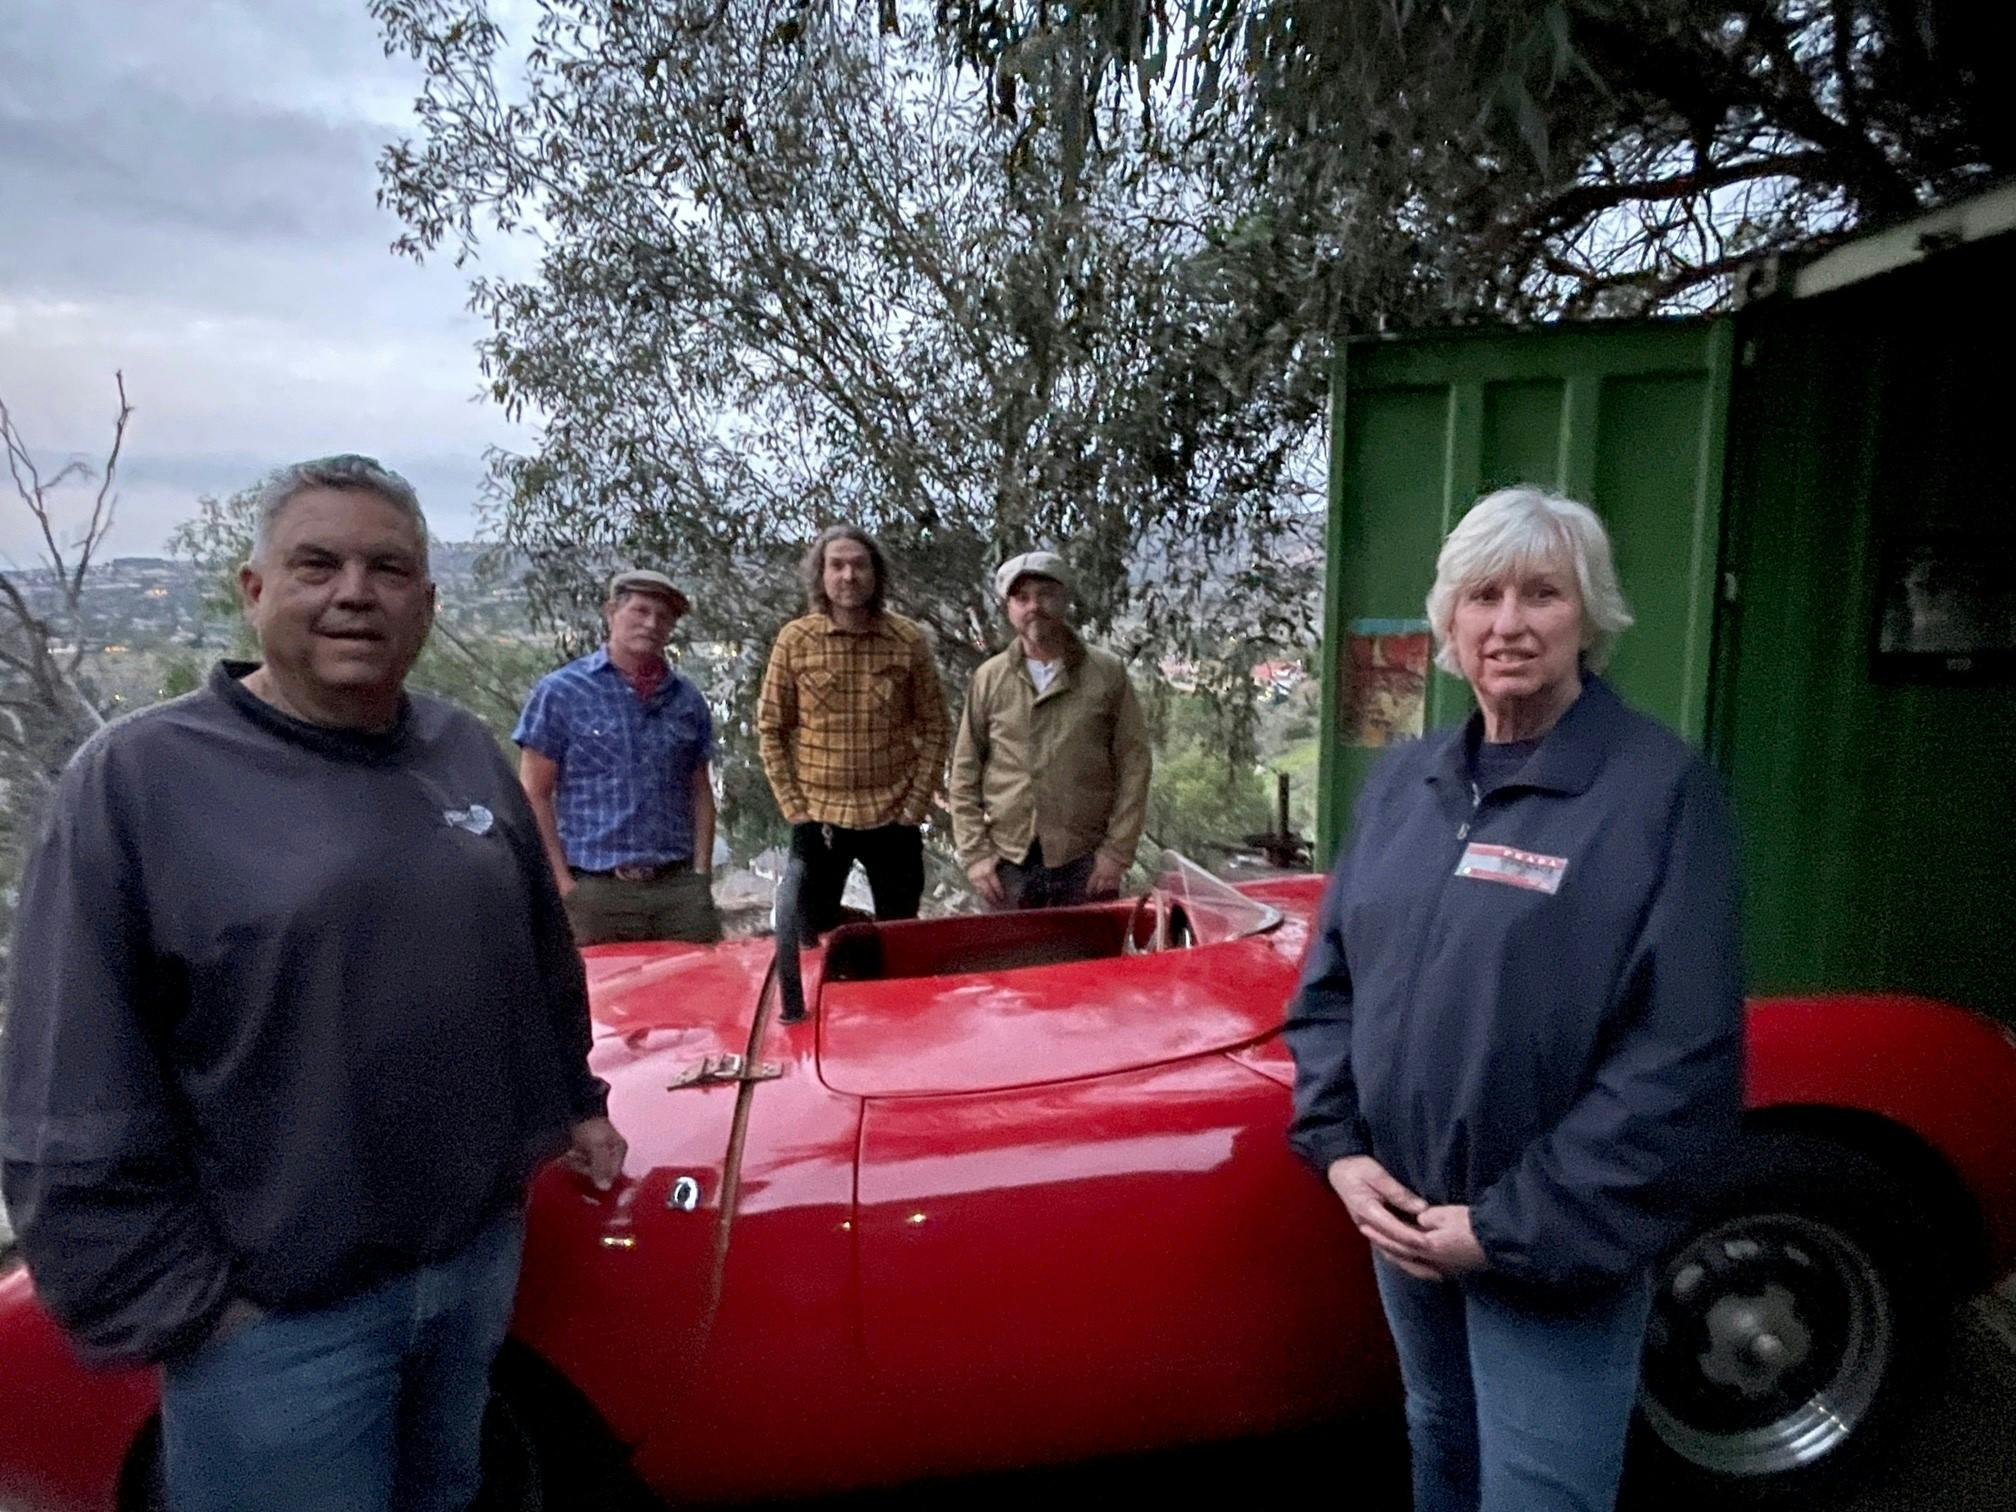 Old Crow - 1955 Porsche 550 Spyder - with owners and crew 1